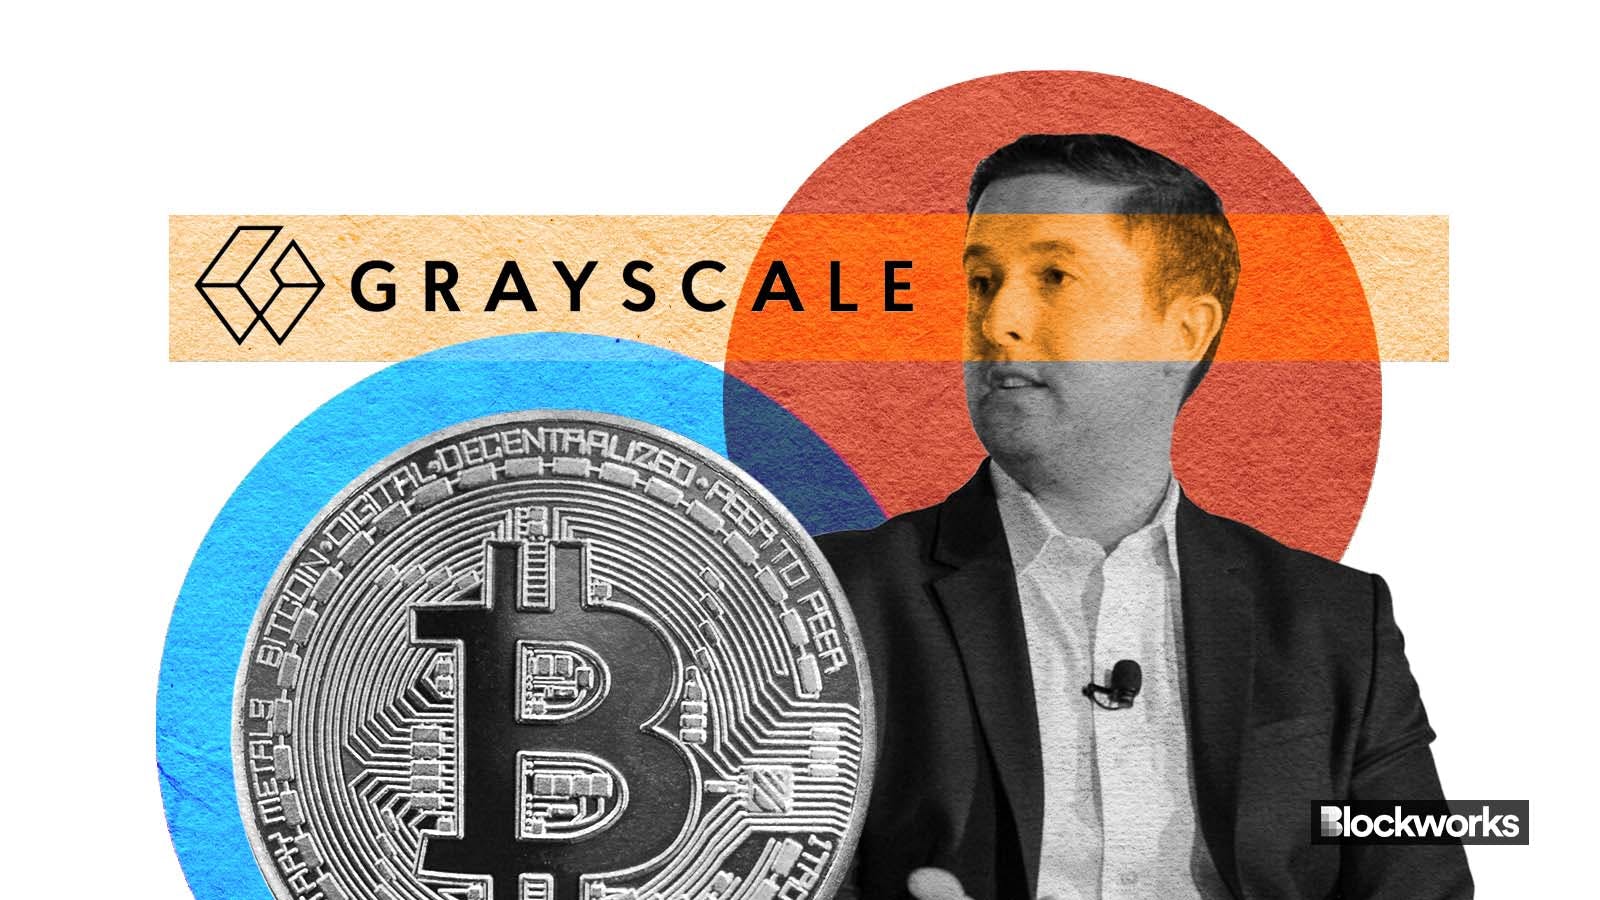 Grayscale CEO resigns (1 minute read)